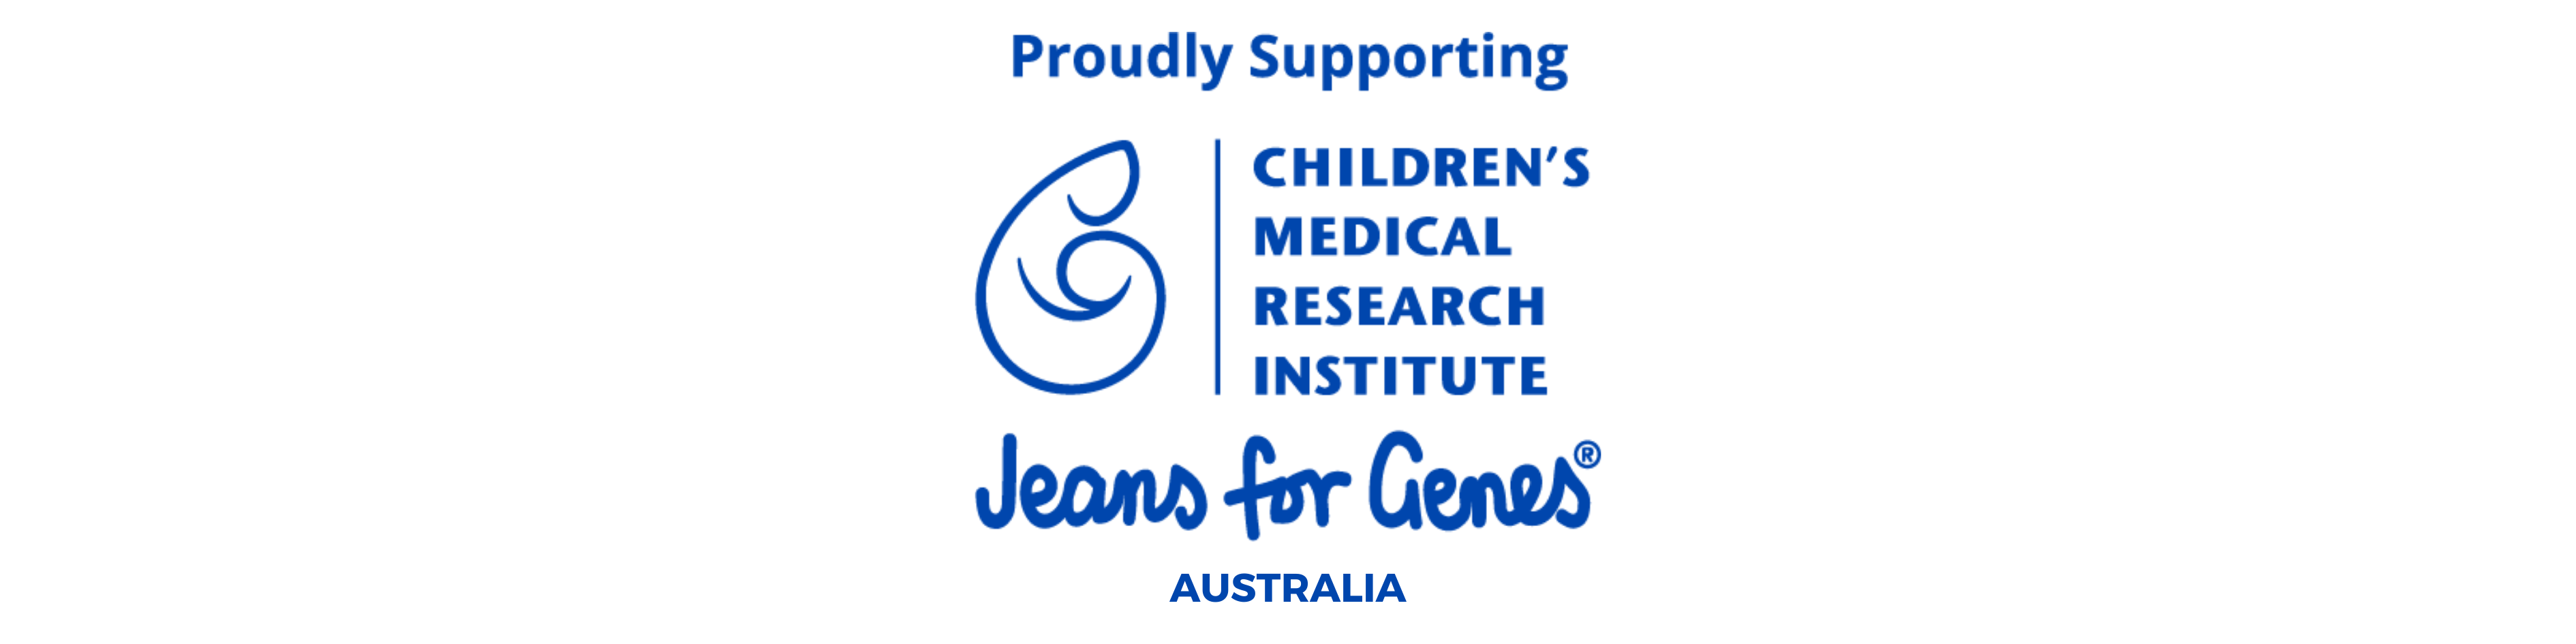 Proudly Supporting Jeans For Genes Children's Medical Research